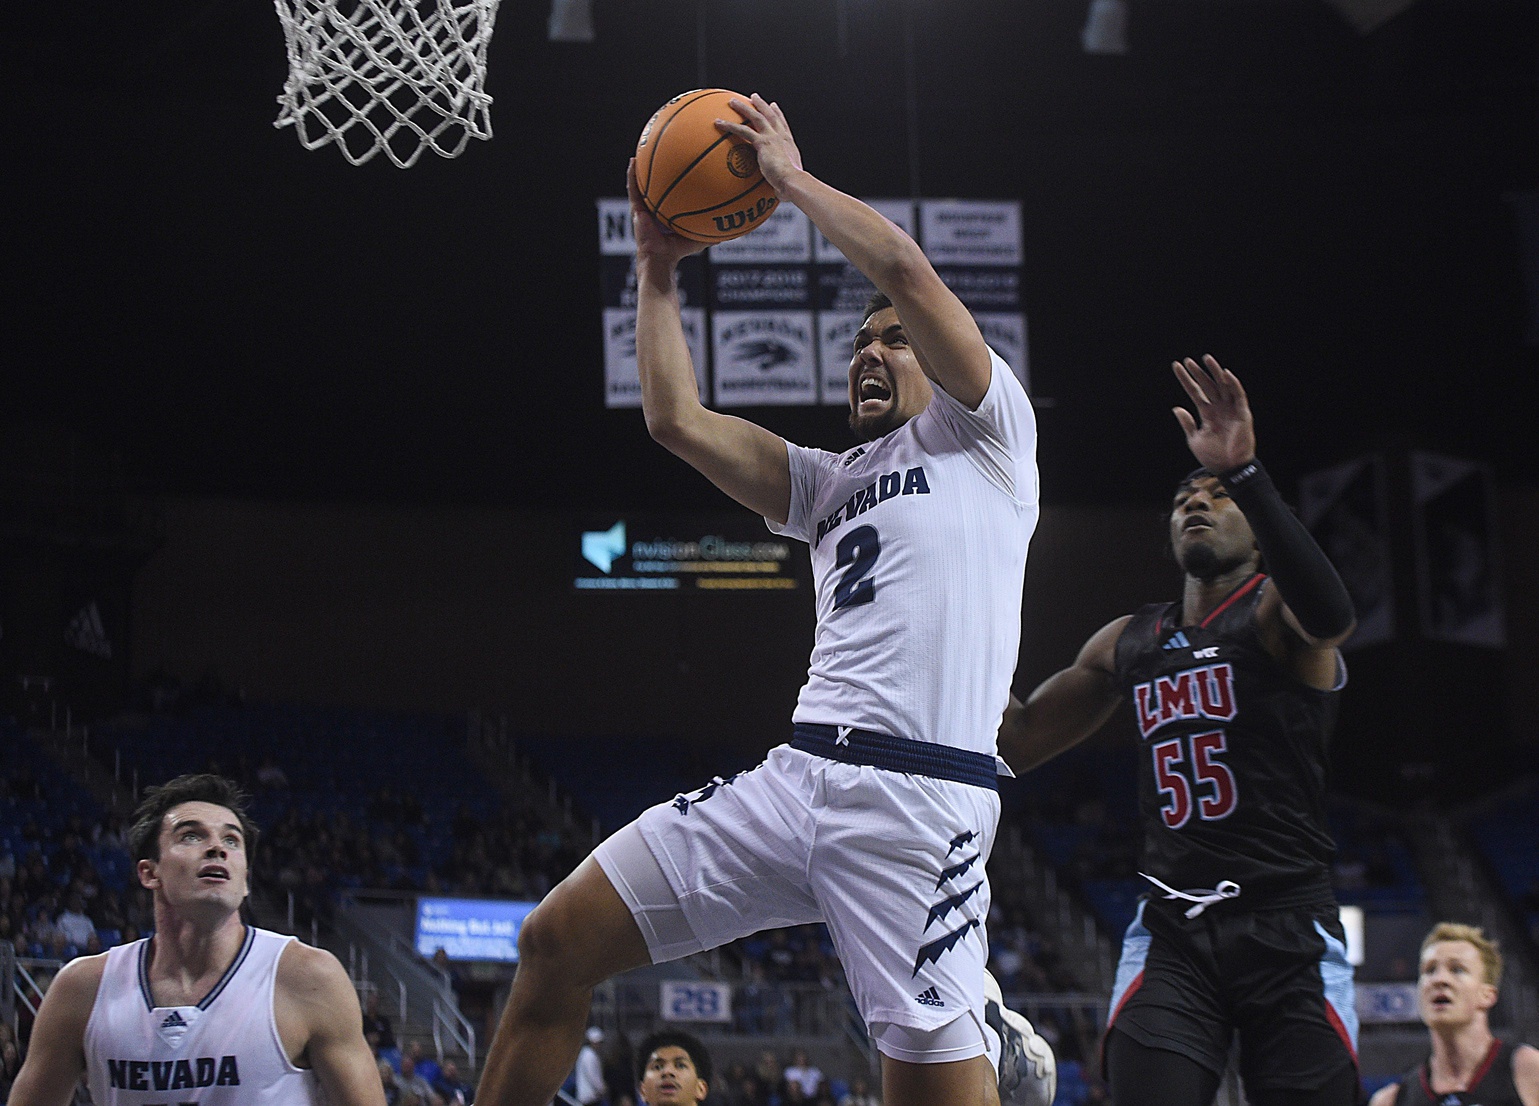 Nevada’s Jarod Lucas shoots while taking on LMU at Lawlor Events Center in Reno on Dec. 2, 2023.